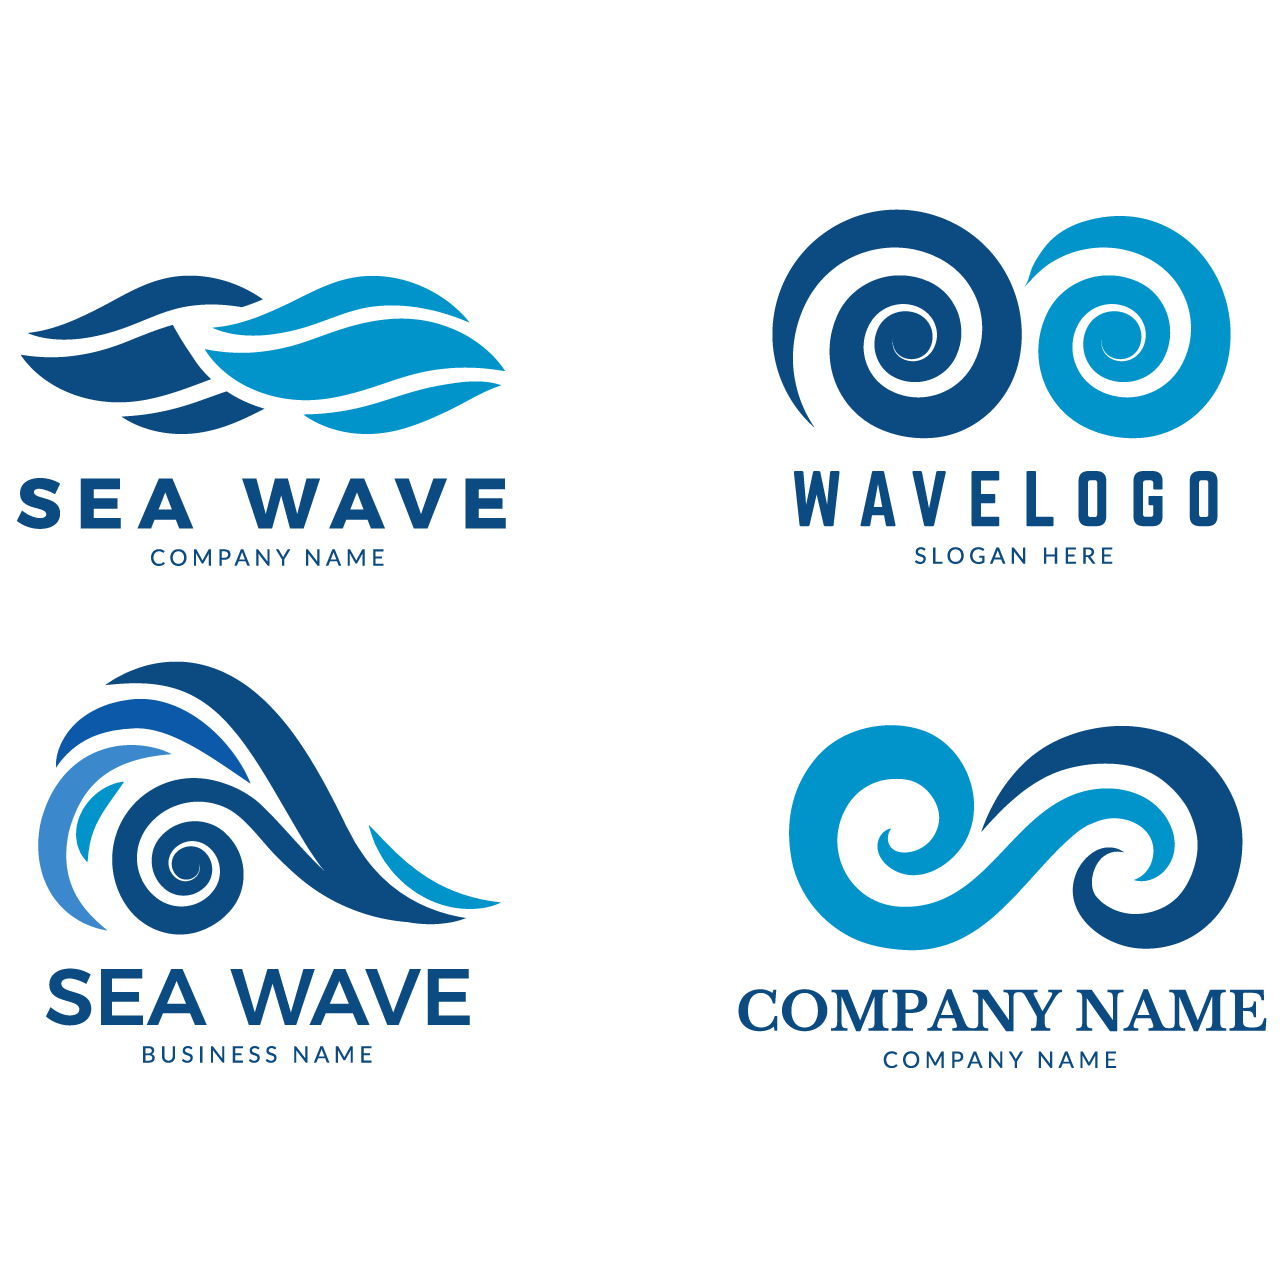 Wave logo graphic symbols ocean flowing sea water stylized business identity water wave logo business designs